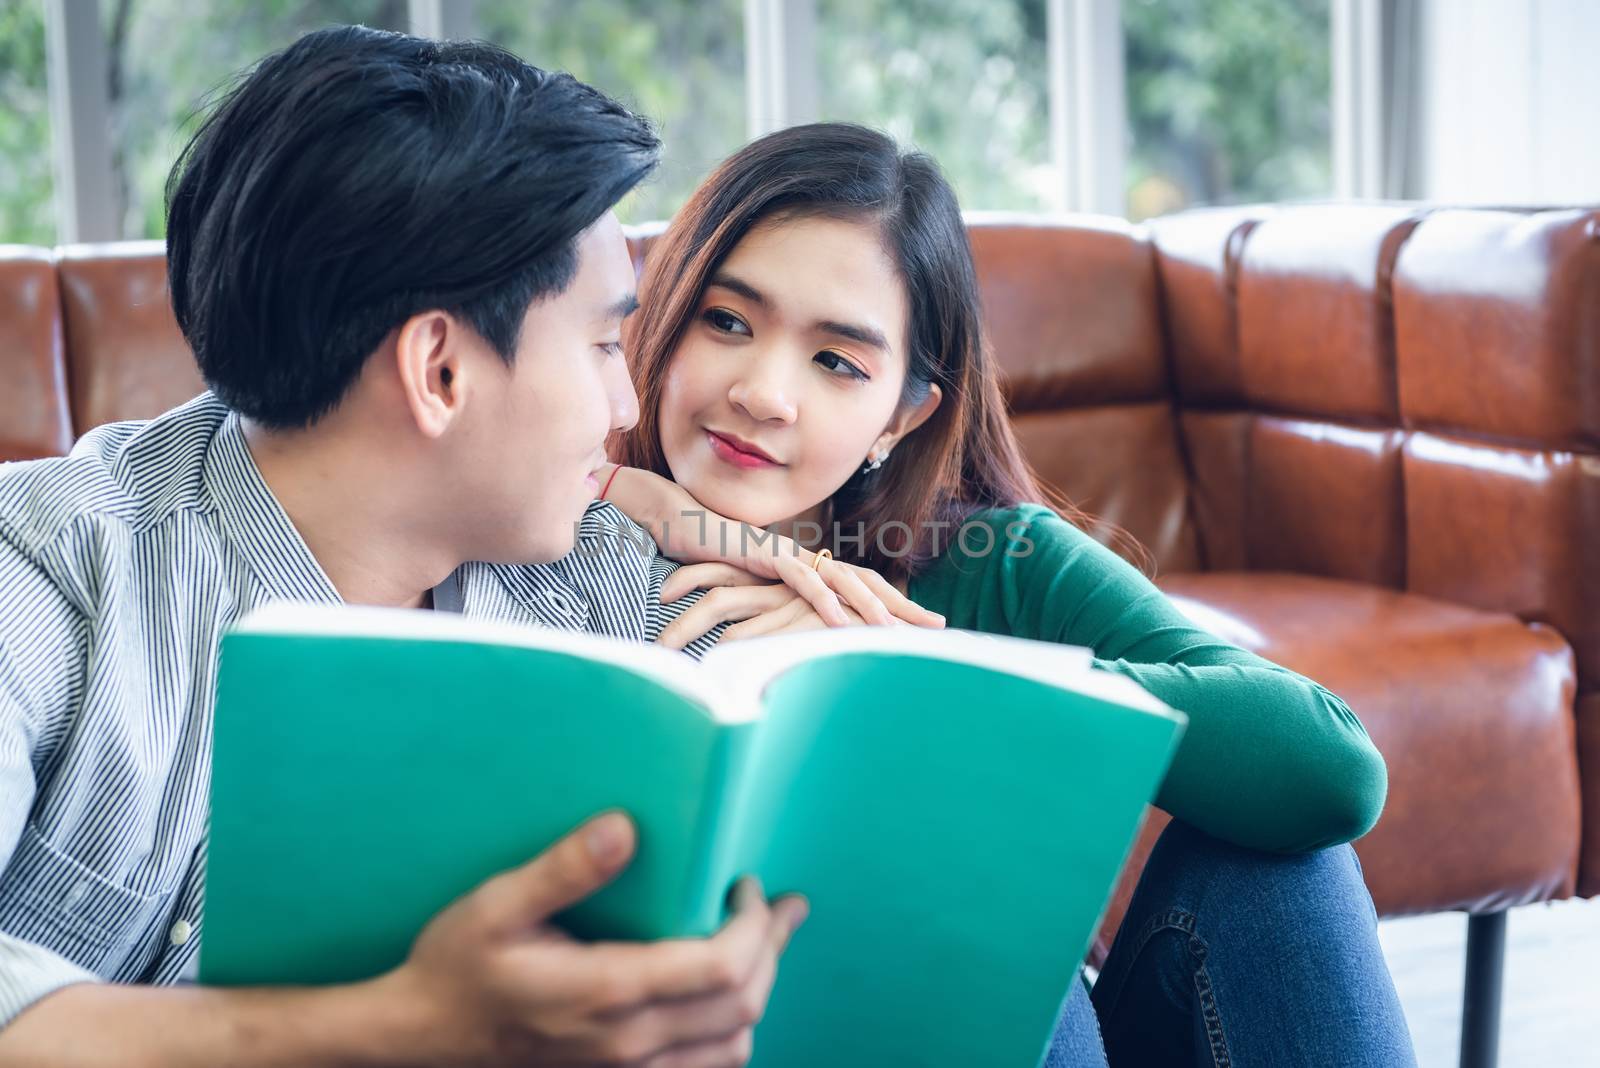 Portrait of Young Couple Love in Romantic Emotions While Reading a Book Together, Couple Young People Having Fan and Relaxing in Living Room. Happy Emotion and Relaxation Lifestyles Concept by MahaHeang245789